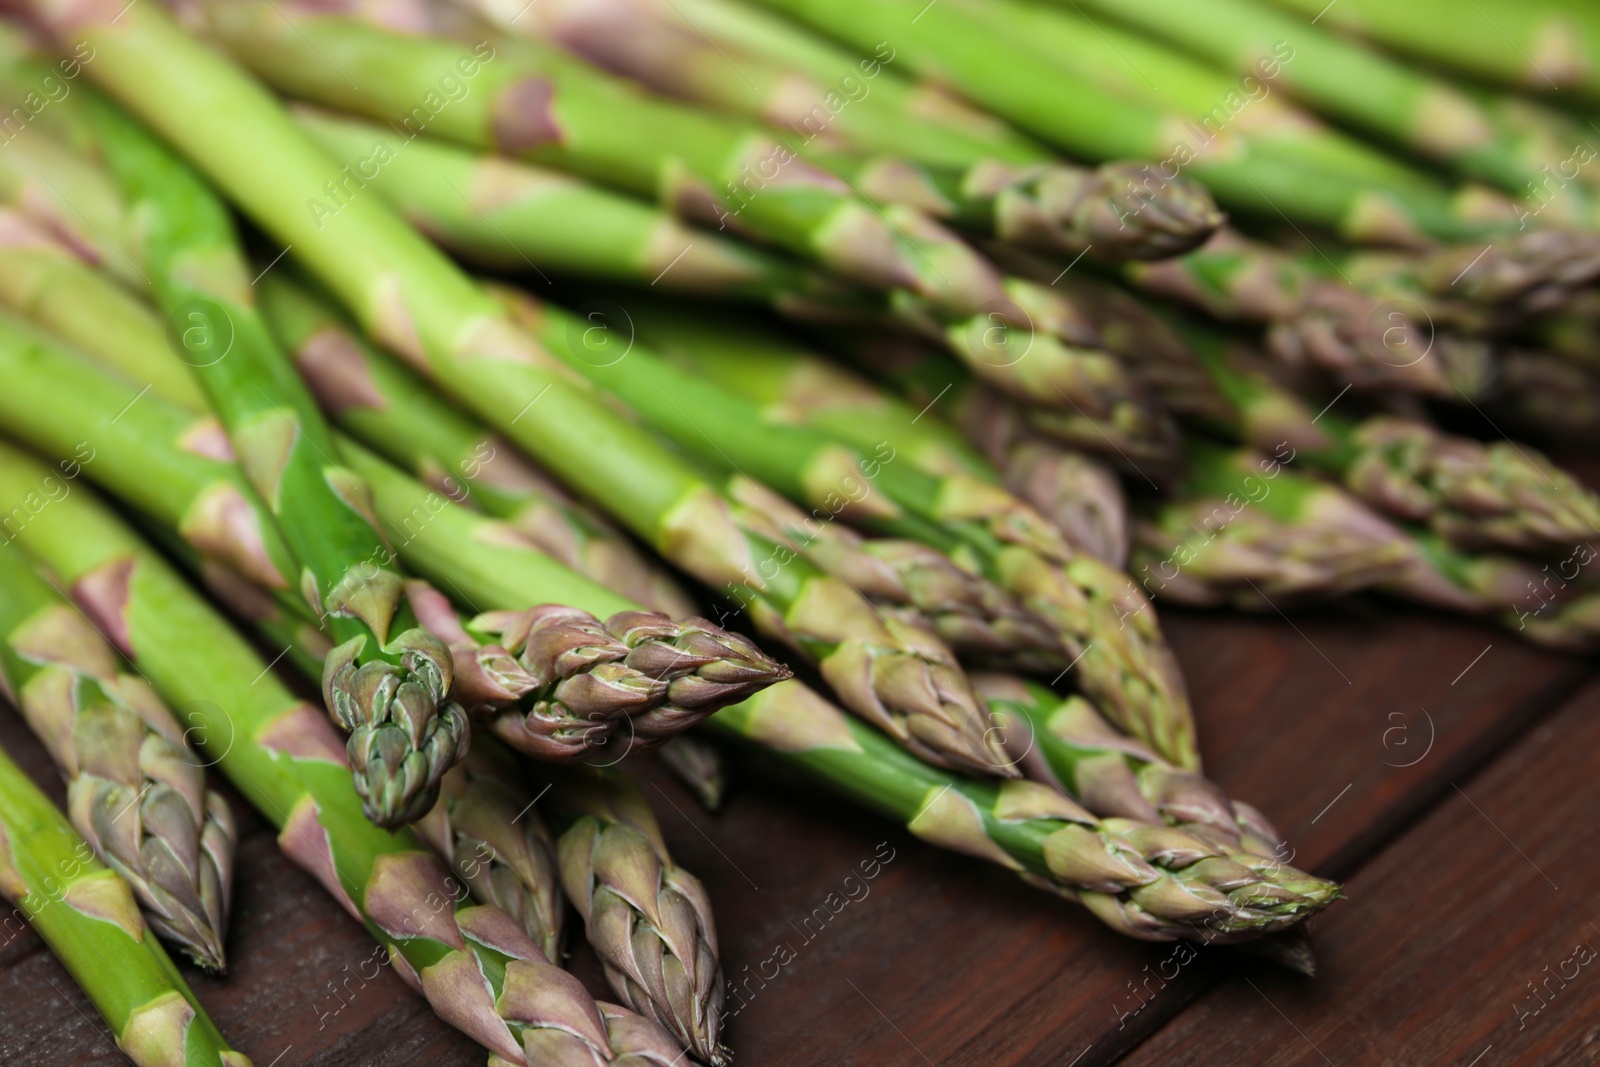 Photo of Fresh raw asparagus on wooden table, closeup